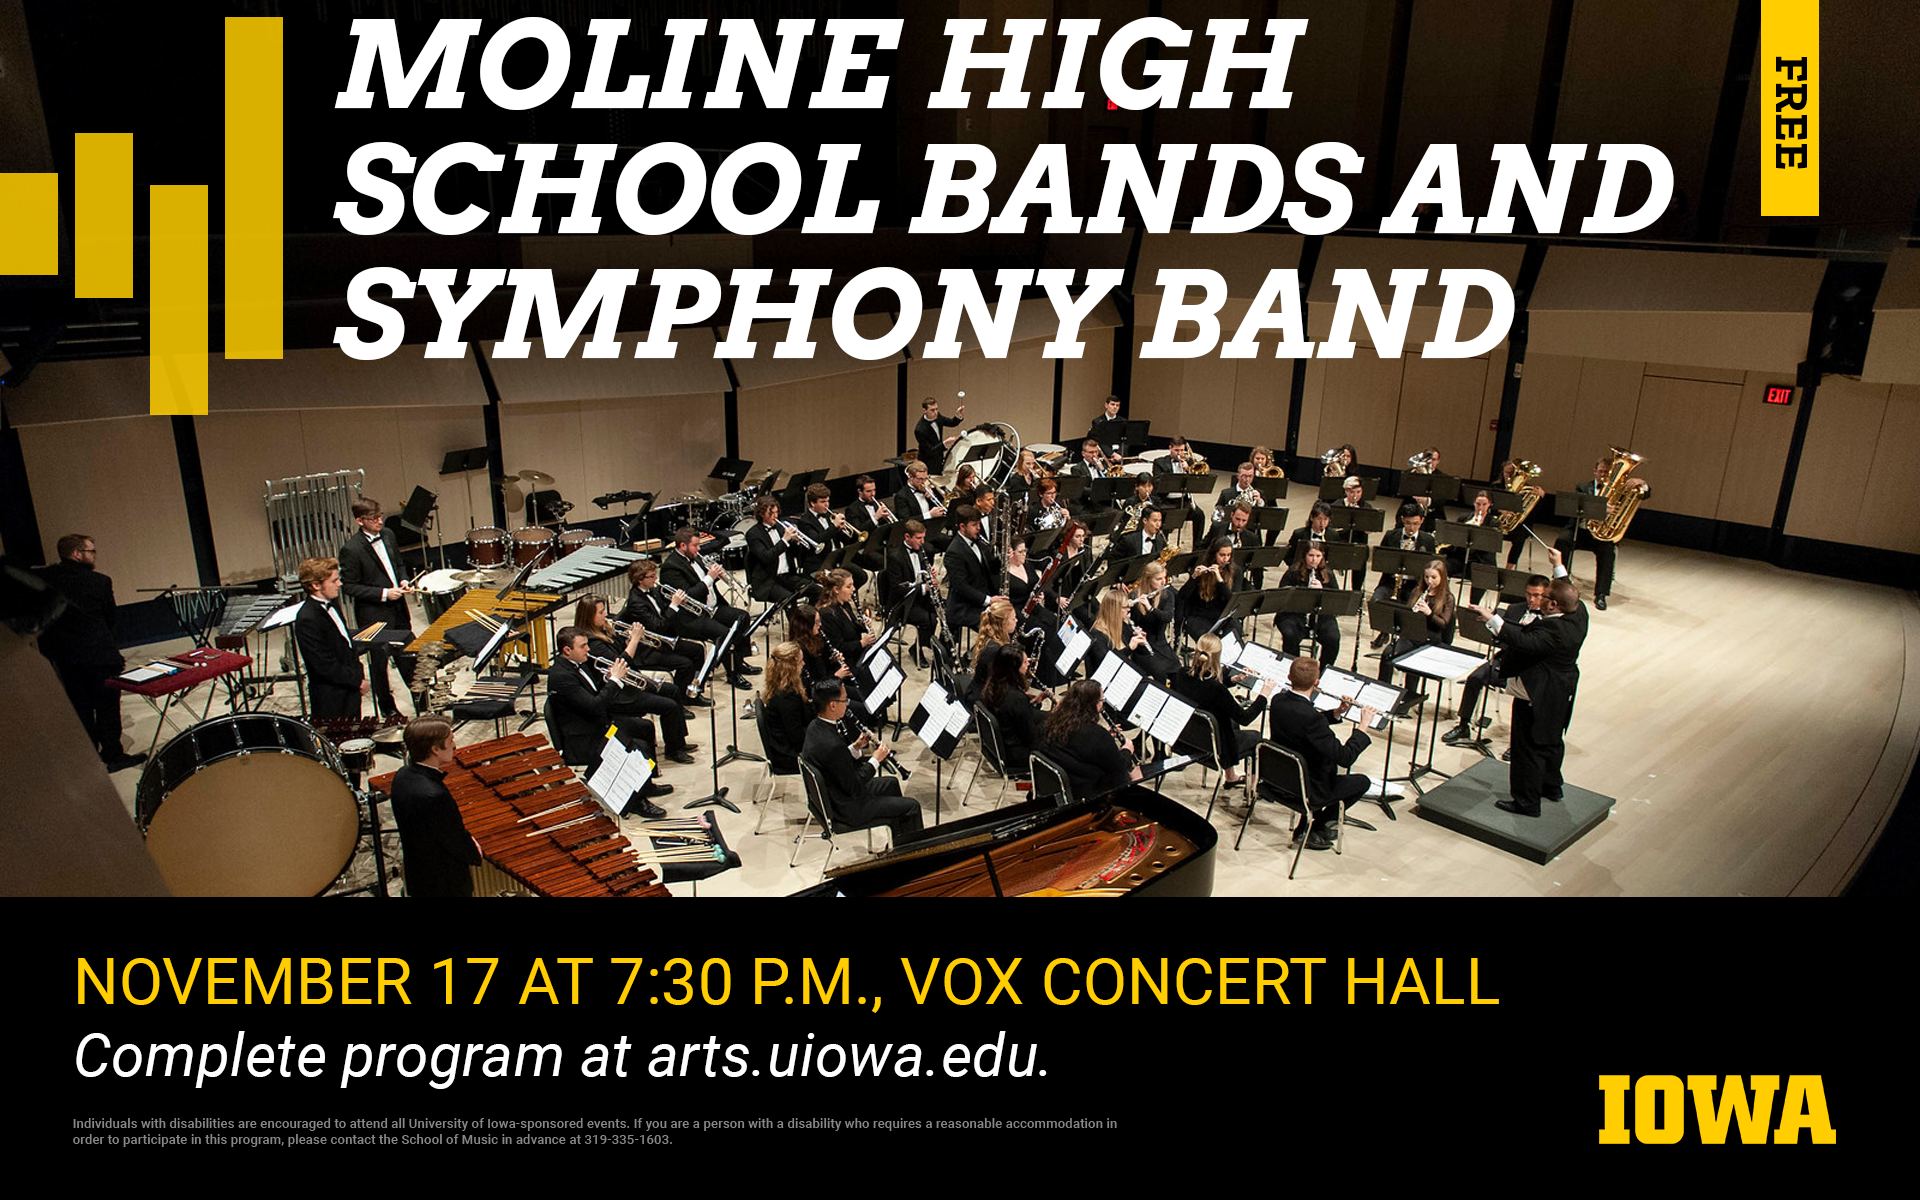 Photo of Wind Ensemble Concert.  Moline High School Bands and Symphony Band, November 17th at 7:30pm, Voxman Music Building Concert Hall. Complete program at arts.uiowa.edu. Free.